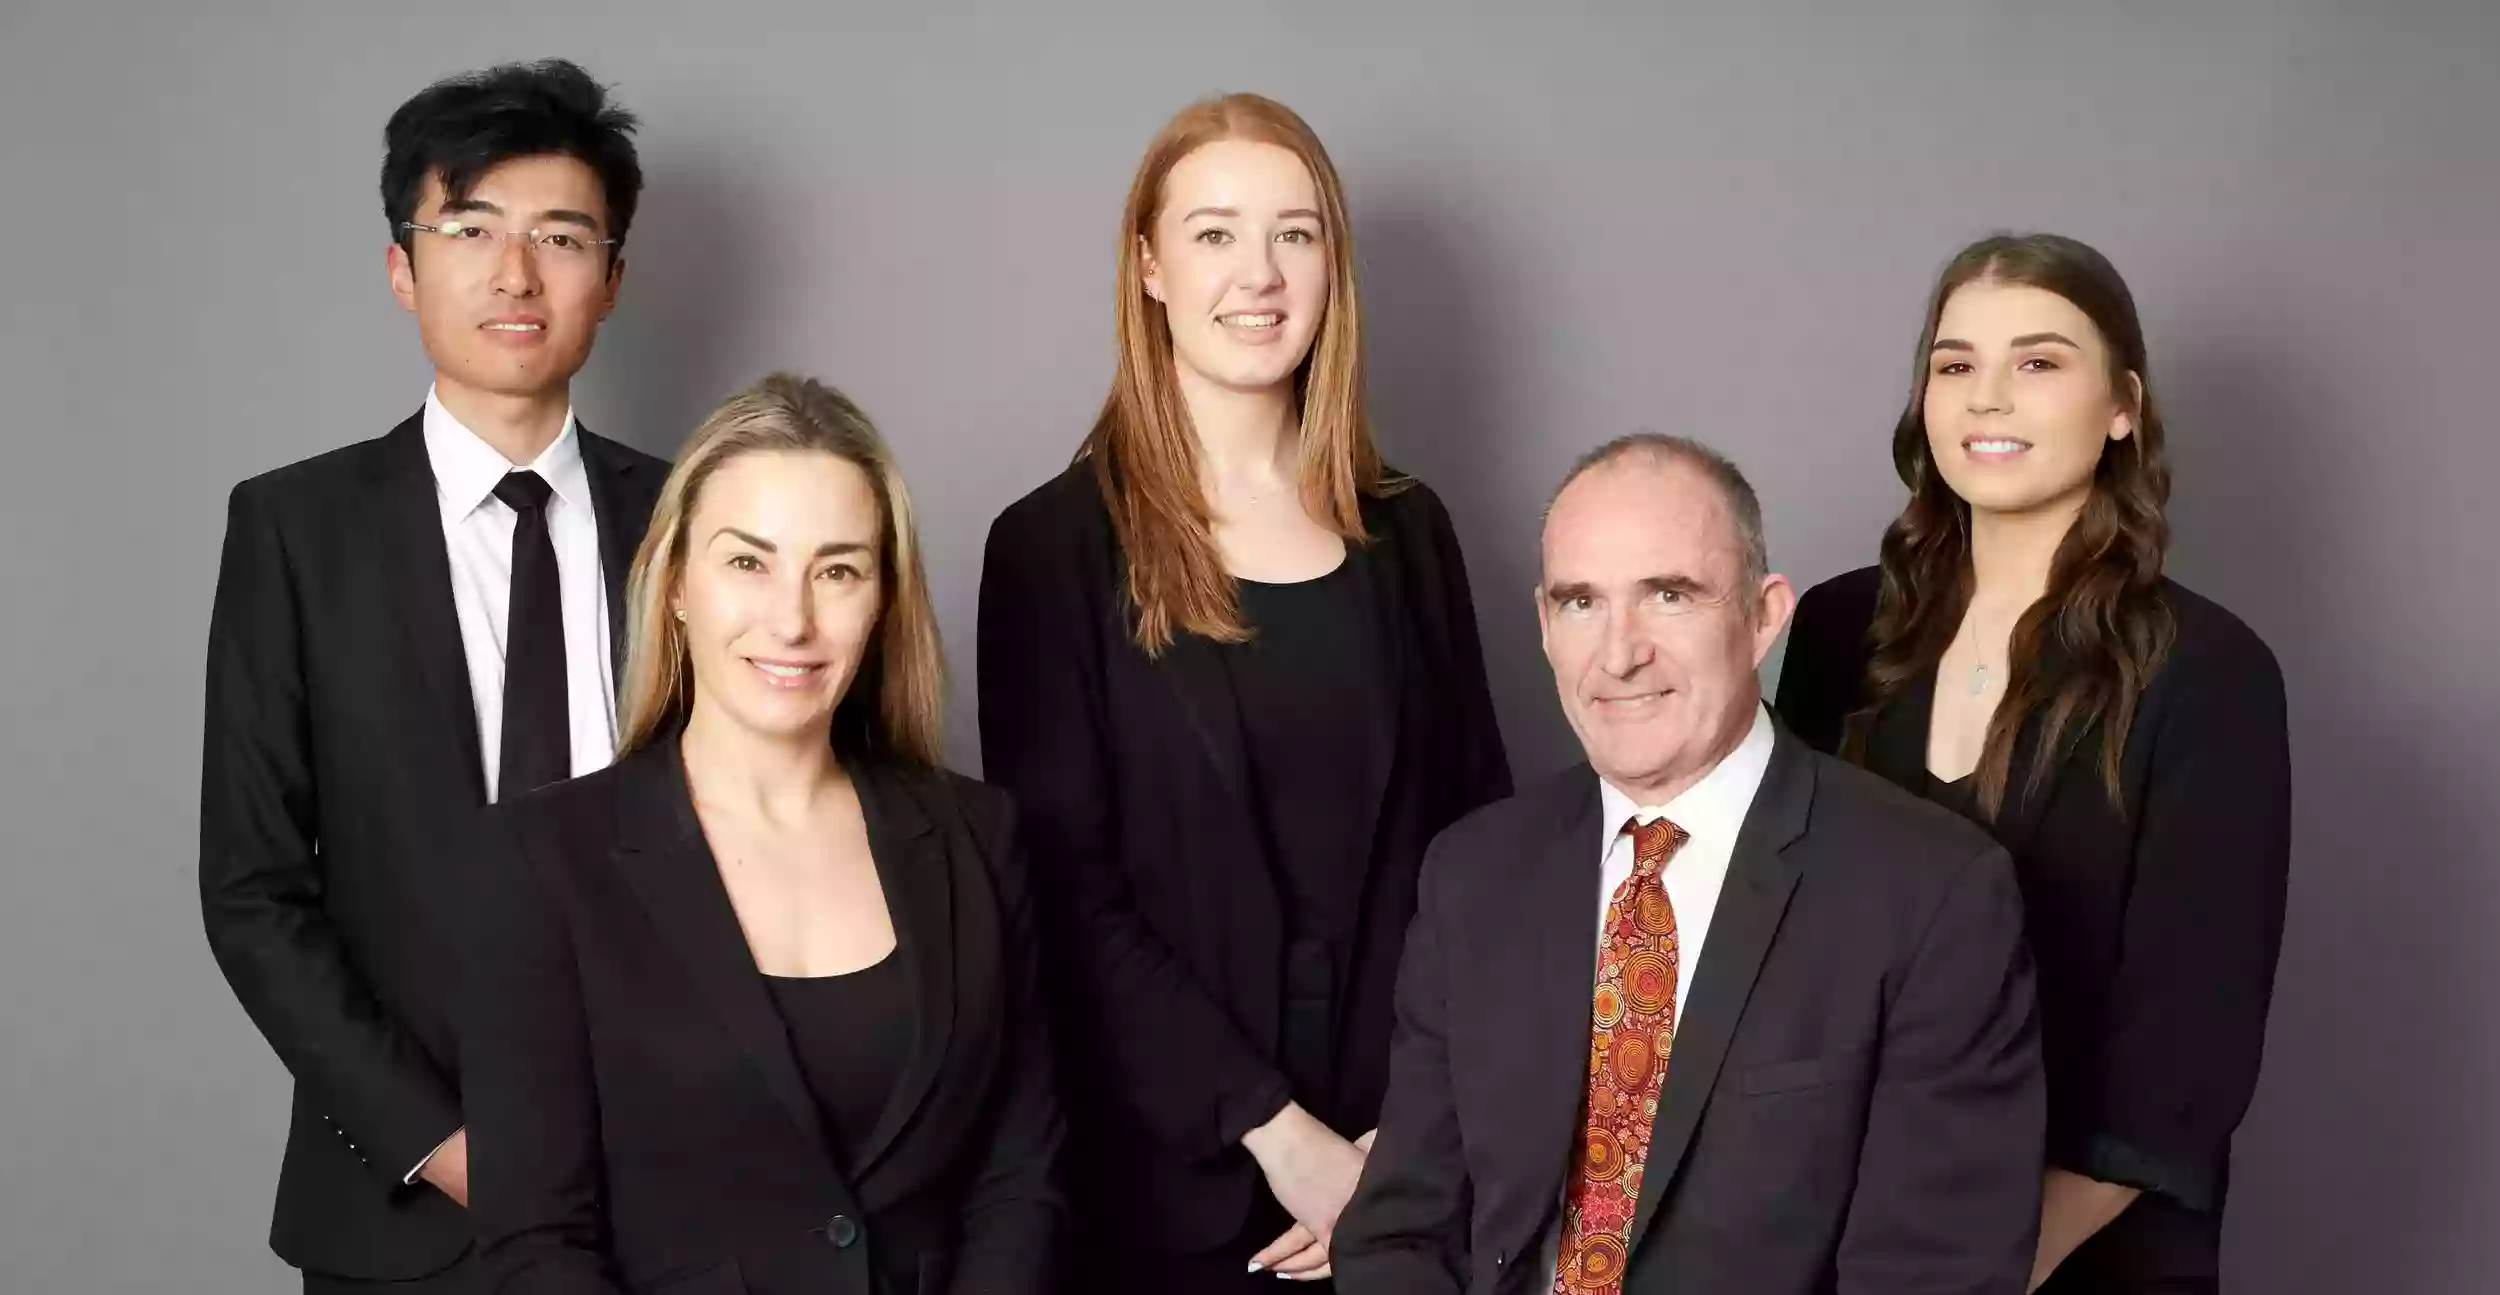 Geelong Lawyers, Barristers & Solicitors